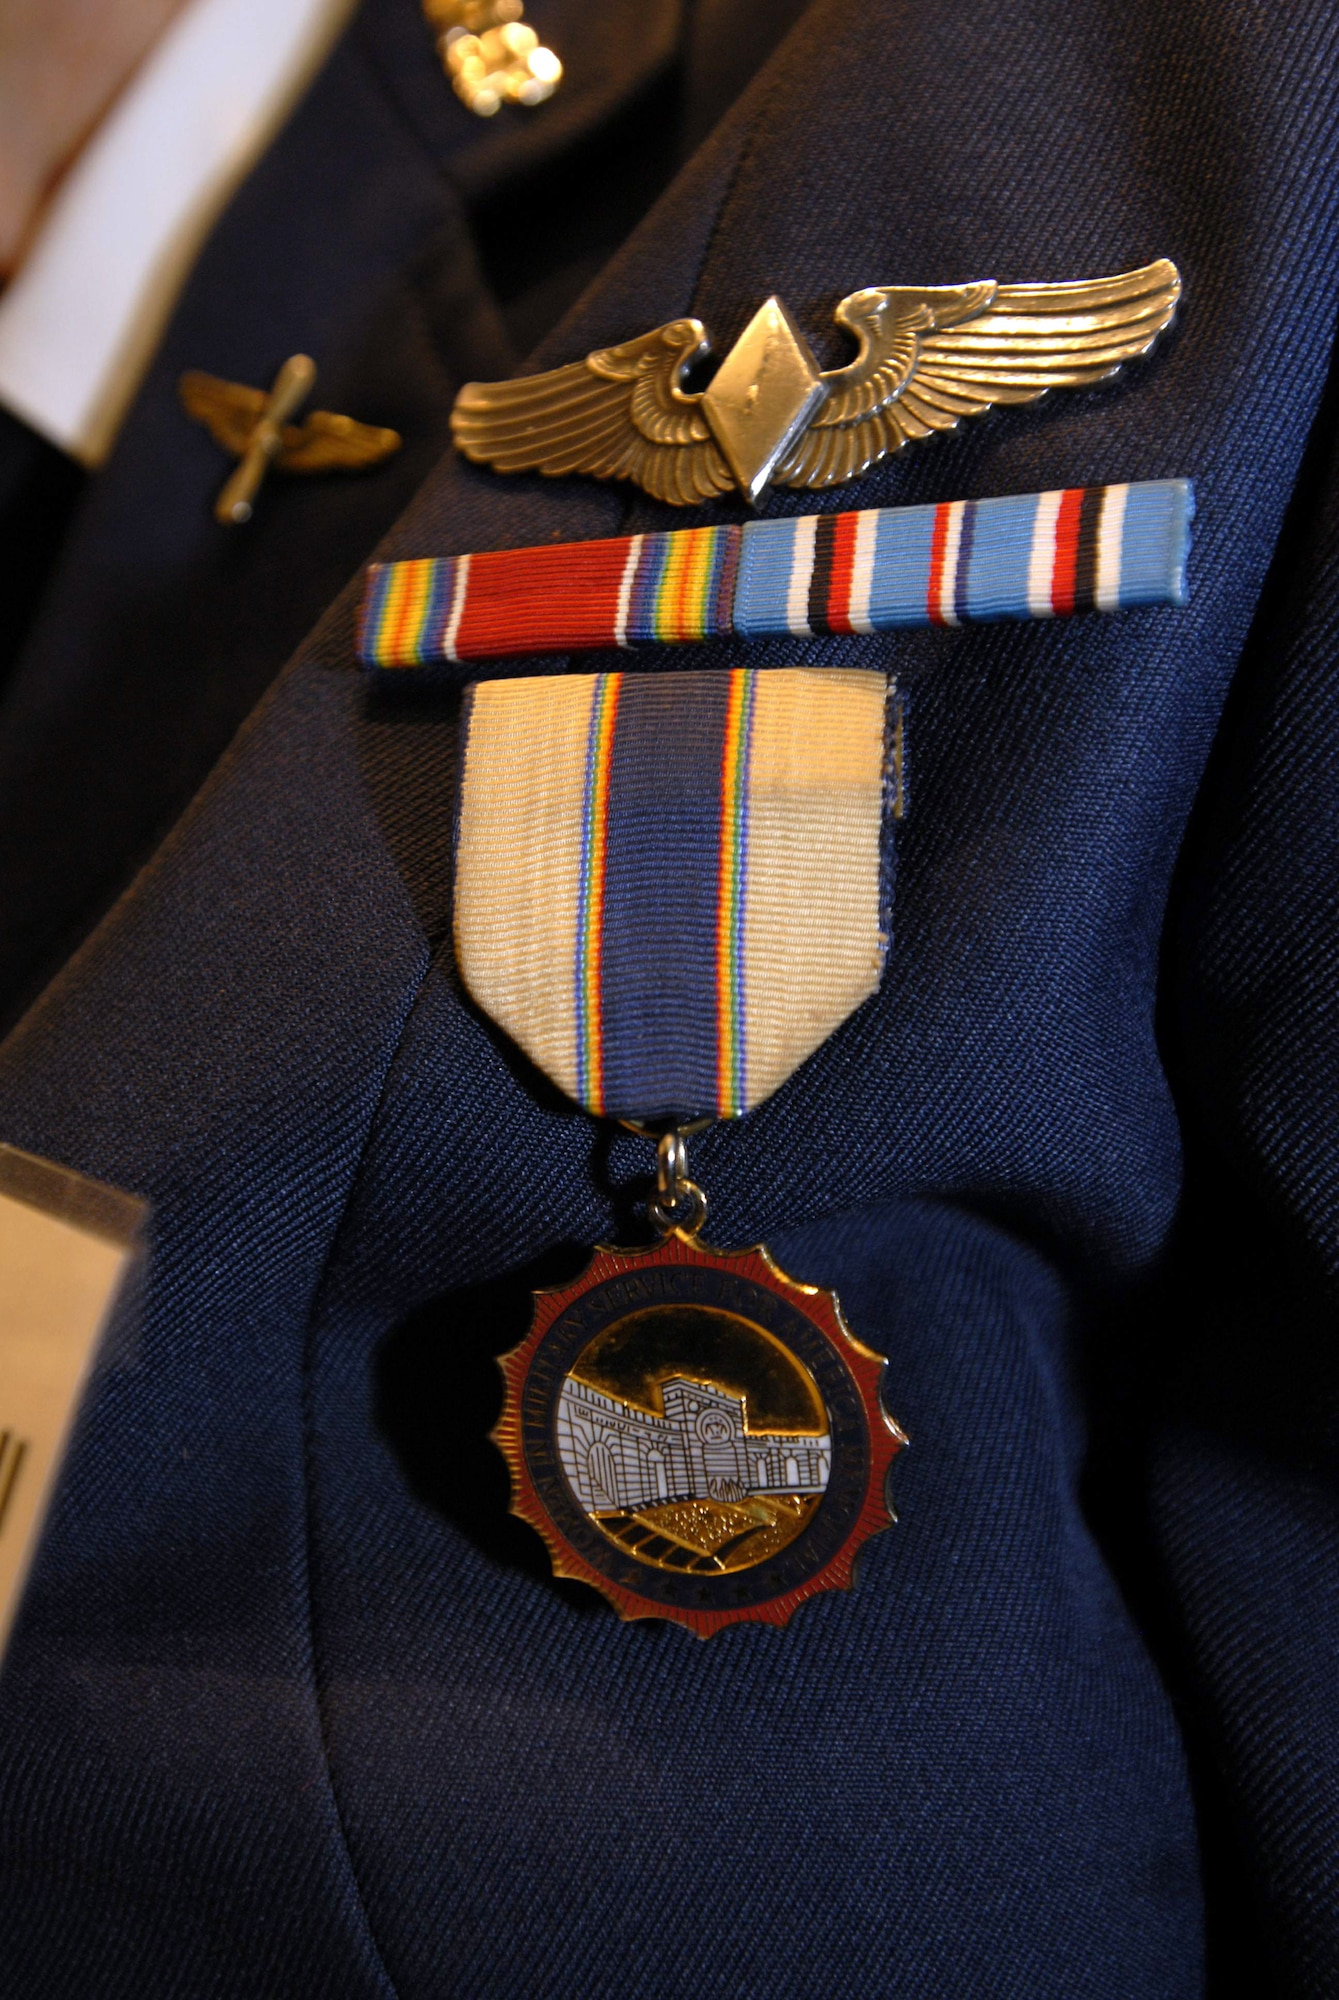 Betty Wall Strohfus, a Women Airforce Service Pilot from Minnesota, wears her World War II-era unifrom during the Congressional Gold Medal ceremony at the Capitol March 10, 2010. In addition to her medals honoring her service during the war, she also donned her flight wings and a medal she received at the opening of the Women in Military Service for America memorial. More than 200 WASPs attended the event, many of them wearing their World War II-era uniforms. (U.S. Air Force photo/Staff Sgt. J.G. Buzanowski)